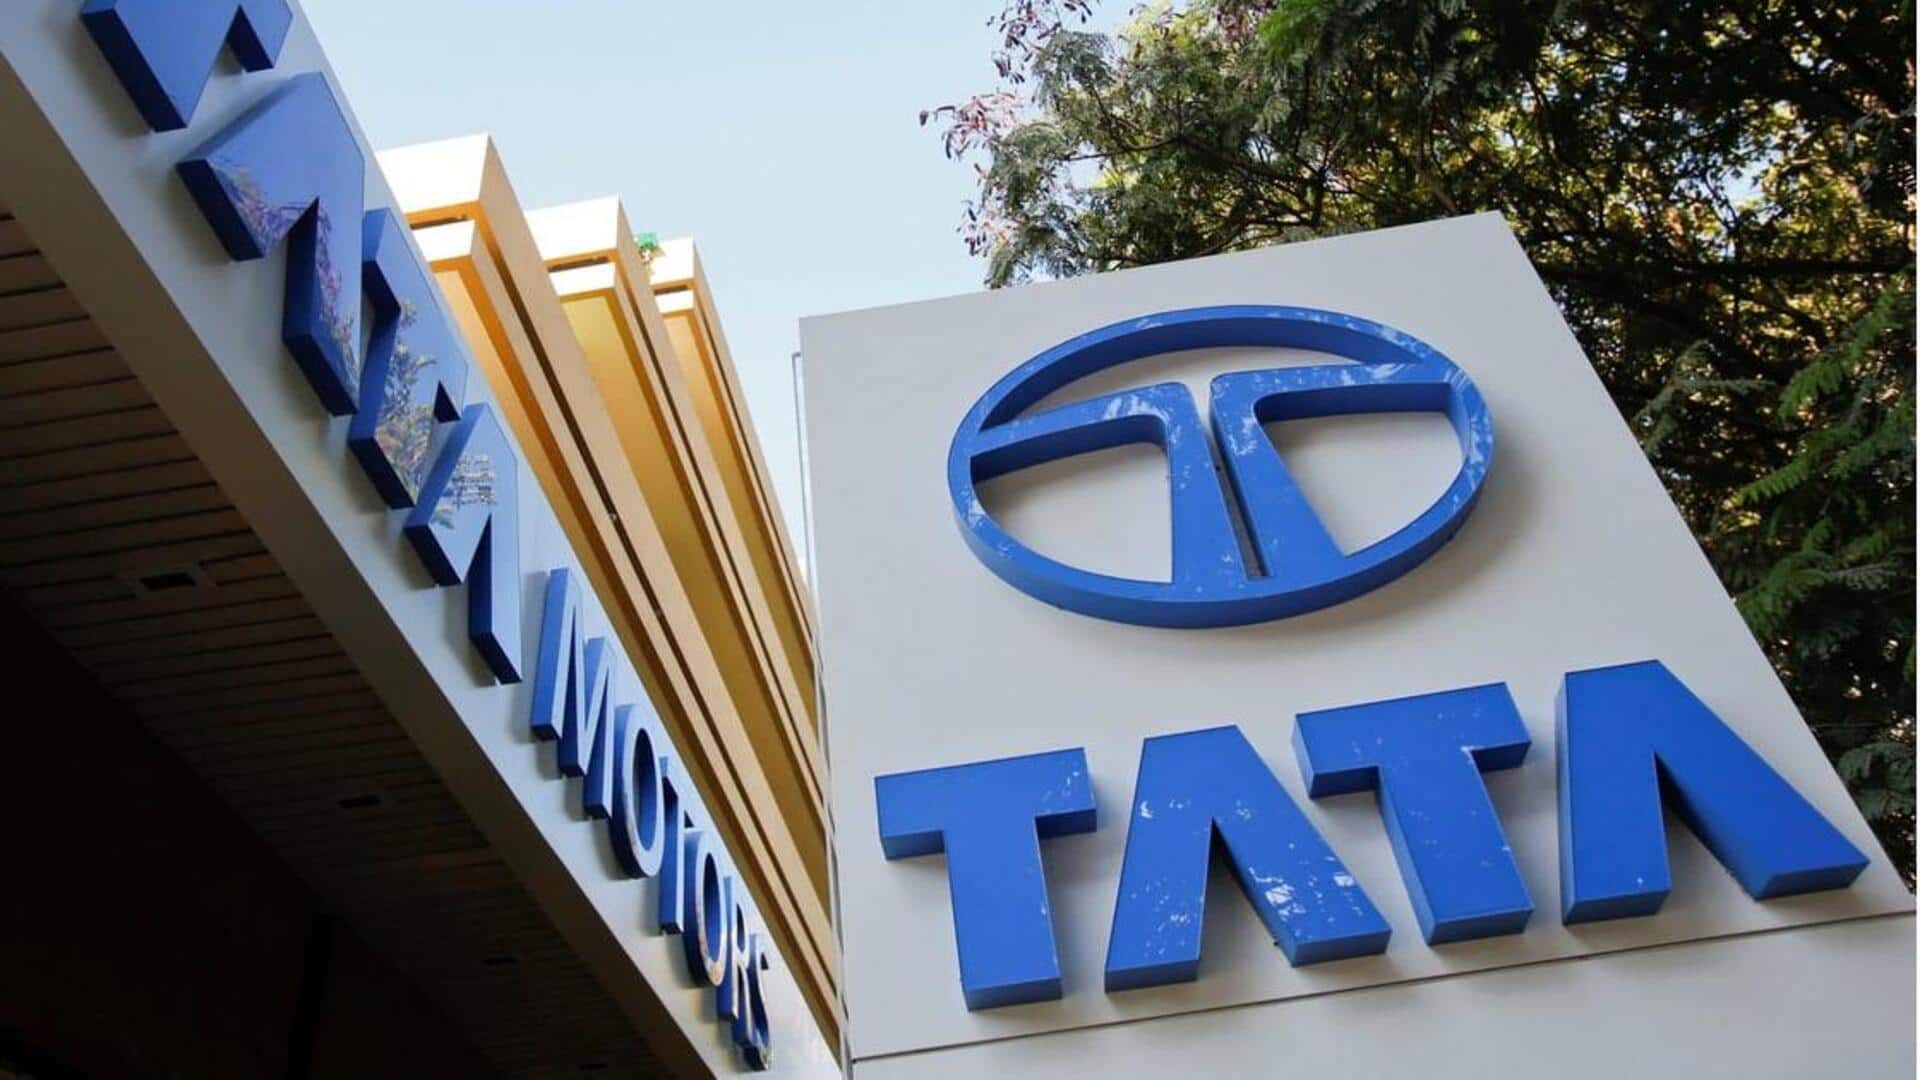 Tata to raise commercial vehicle prices by 3% next month